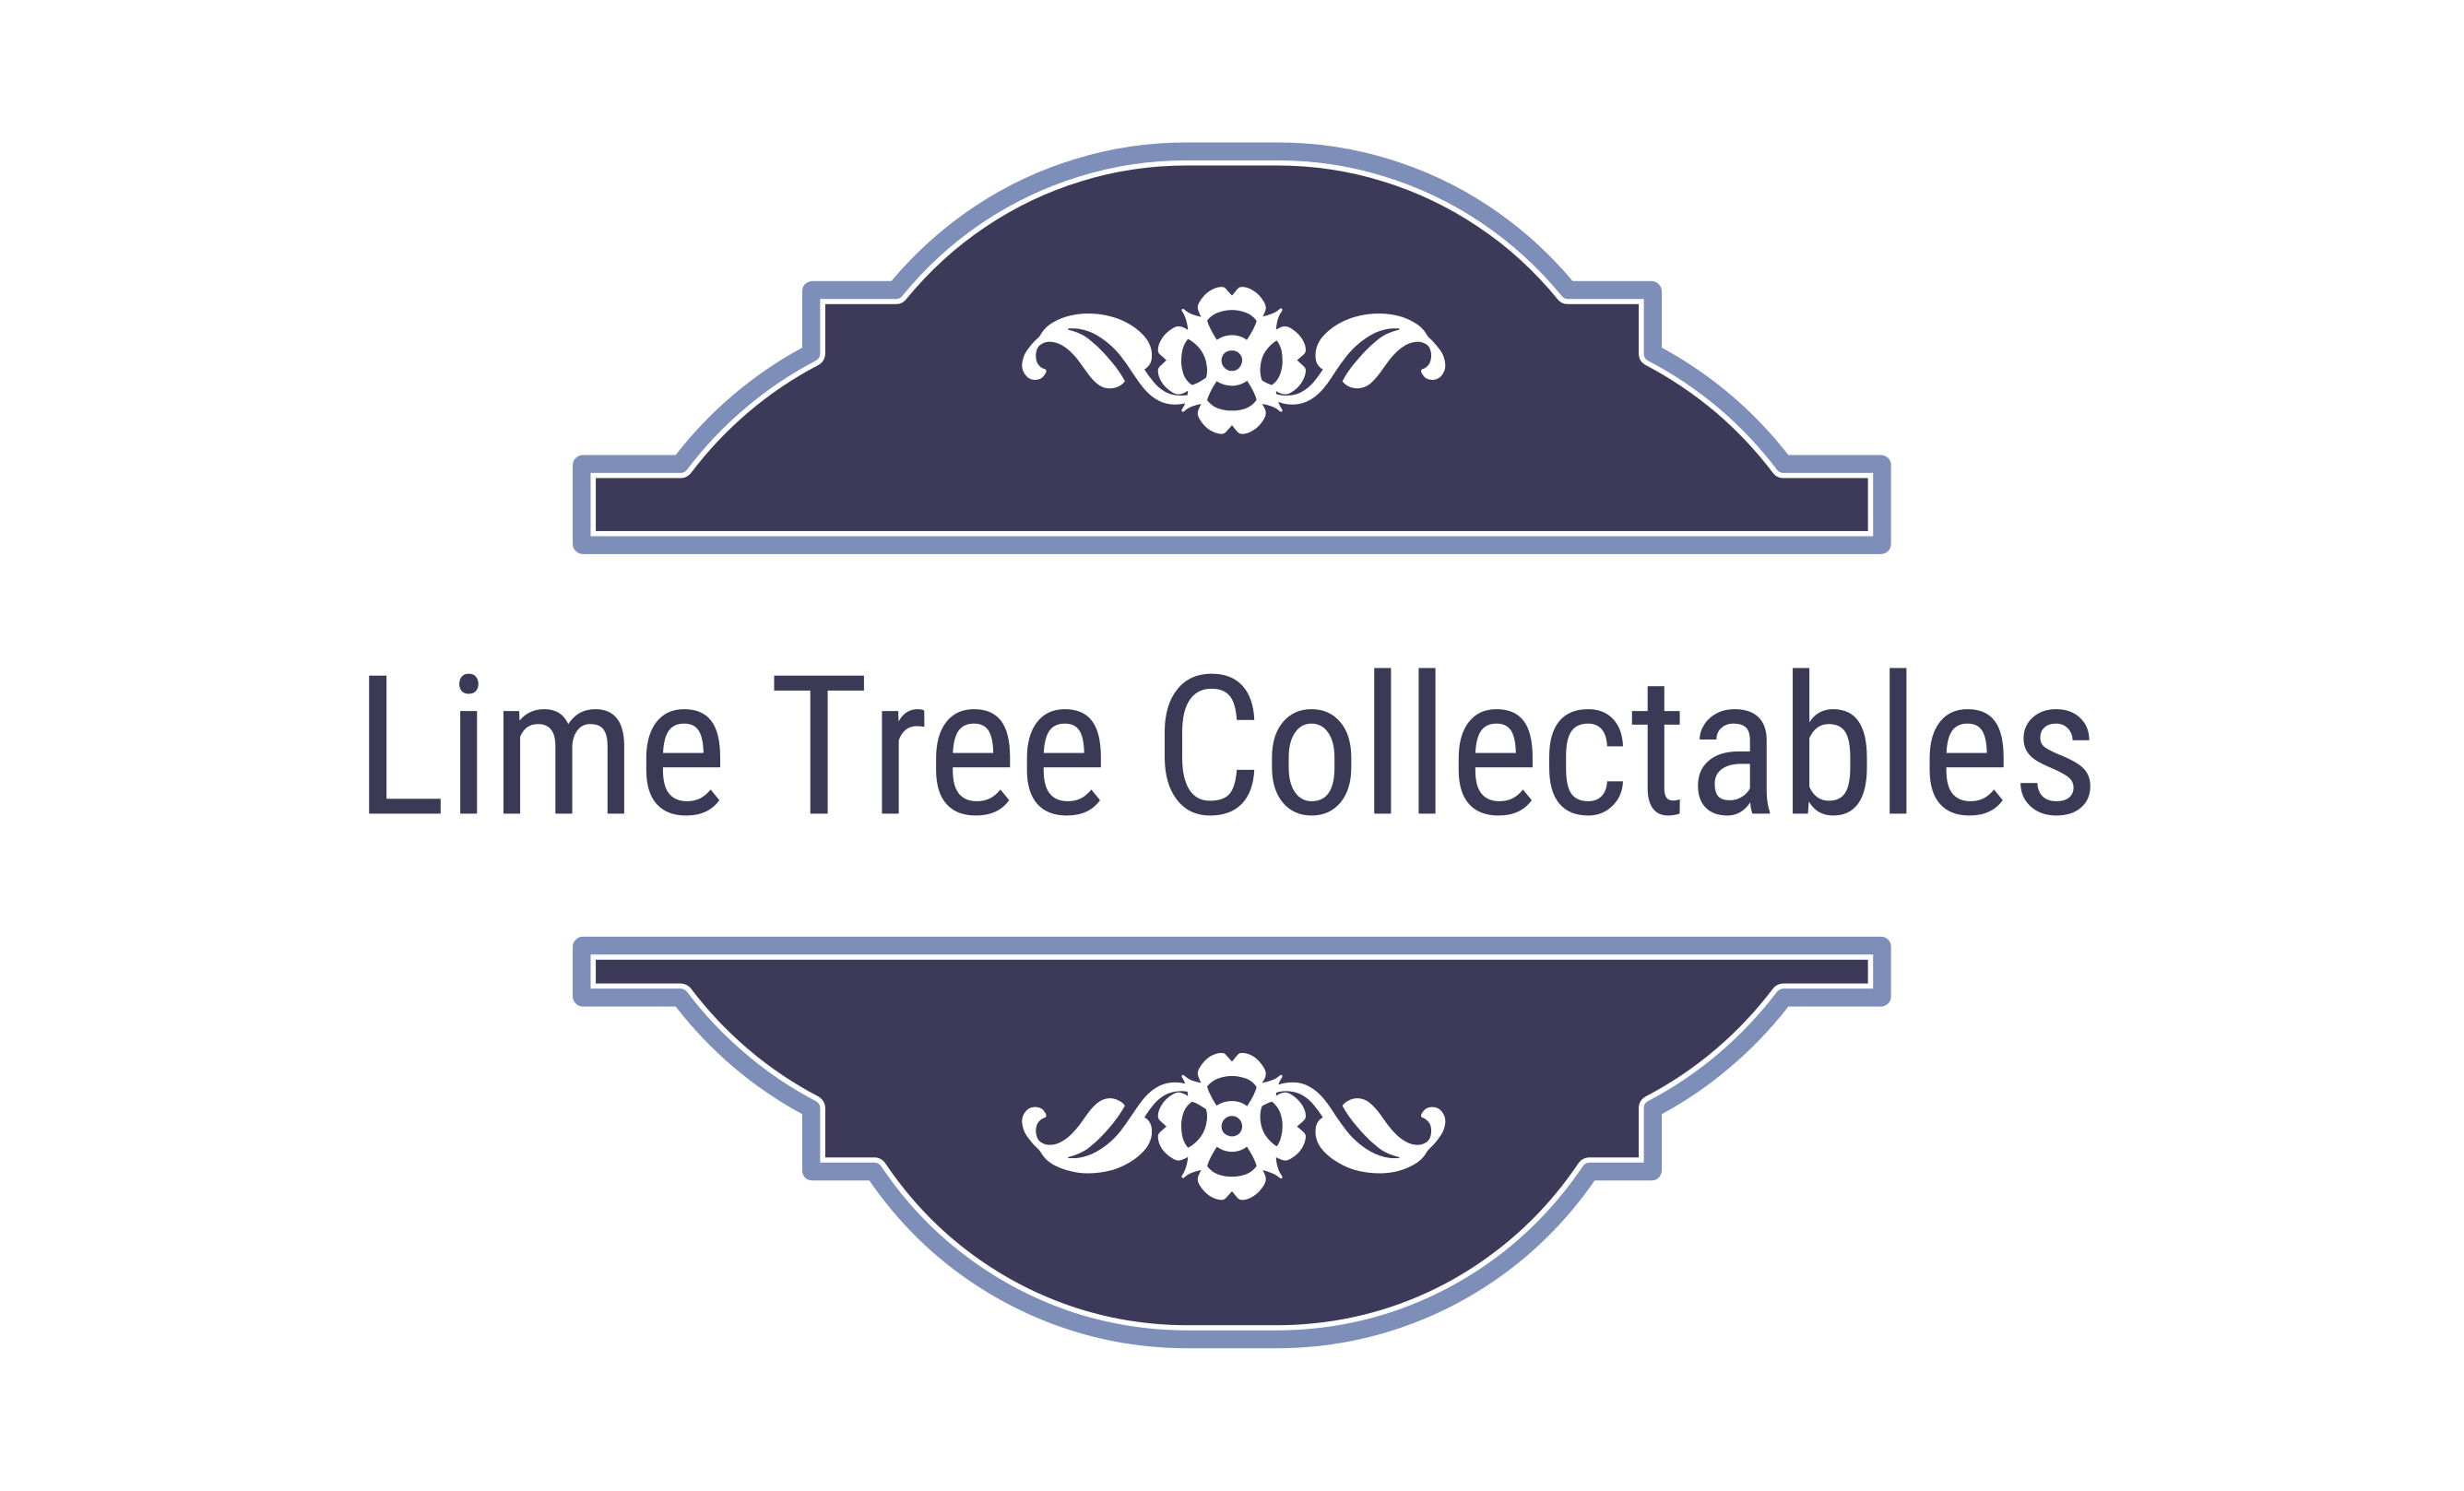 Lime Tree Collectables